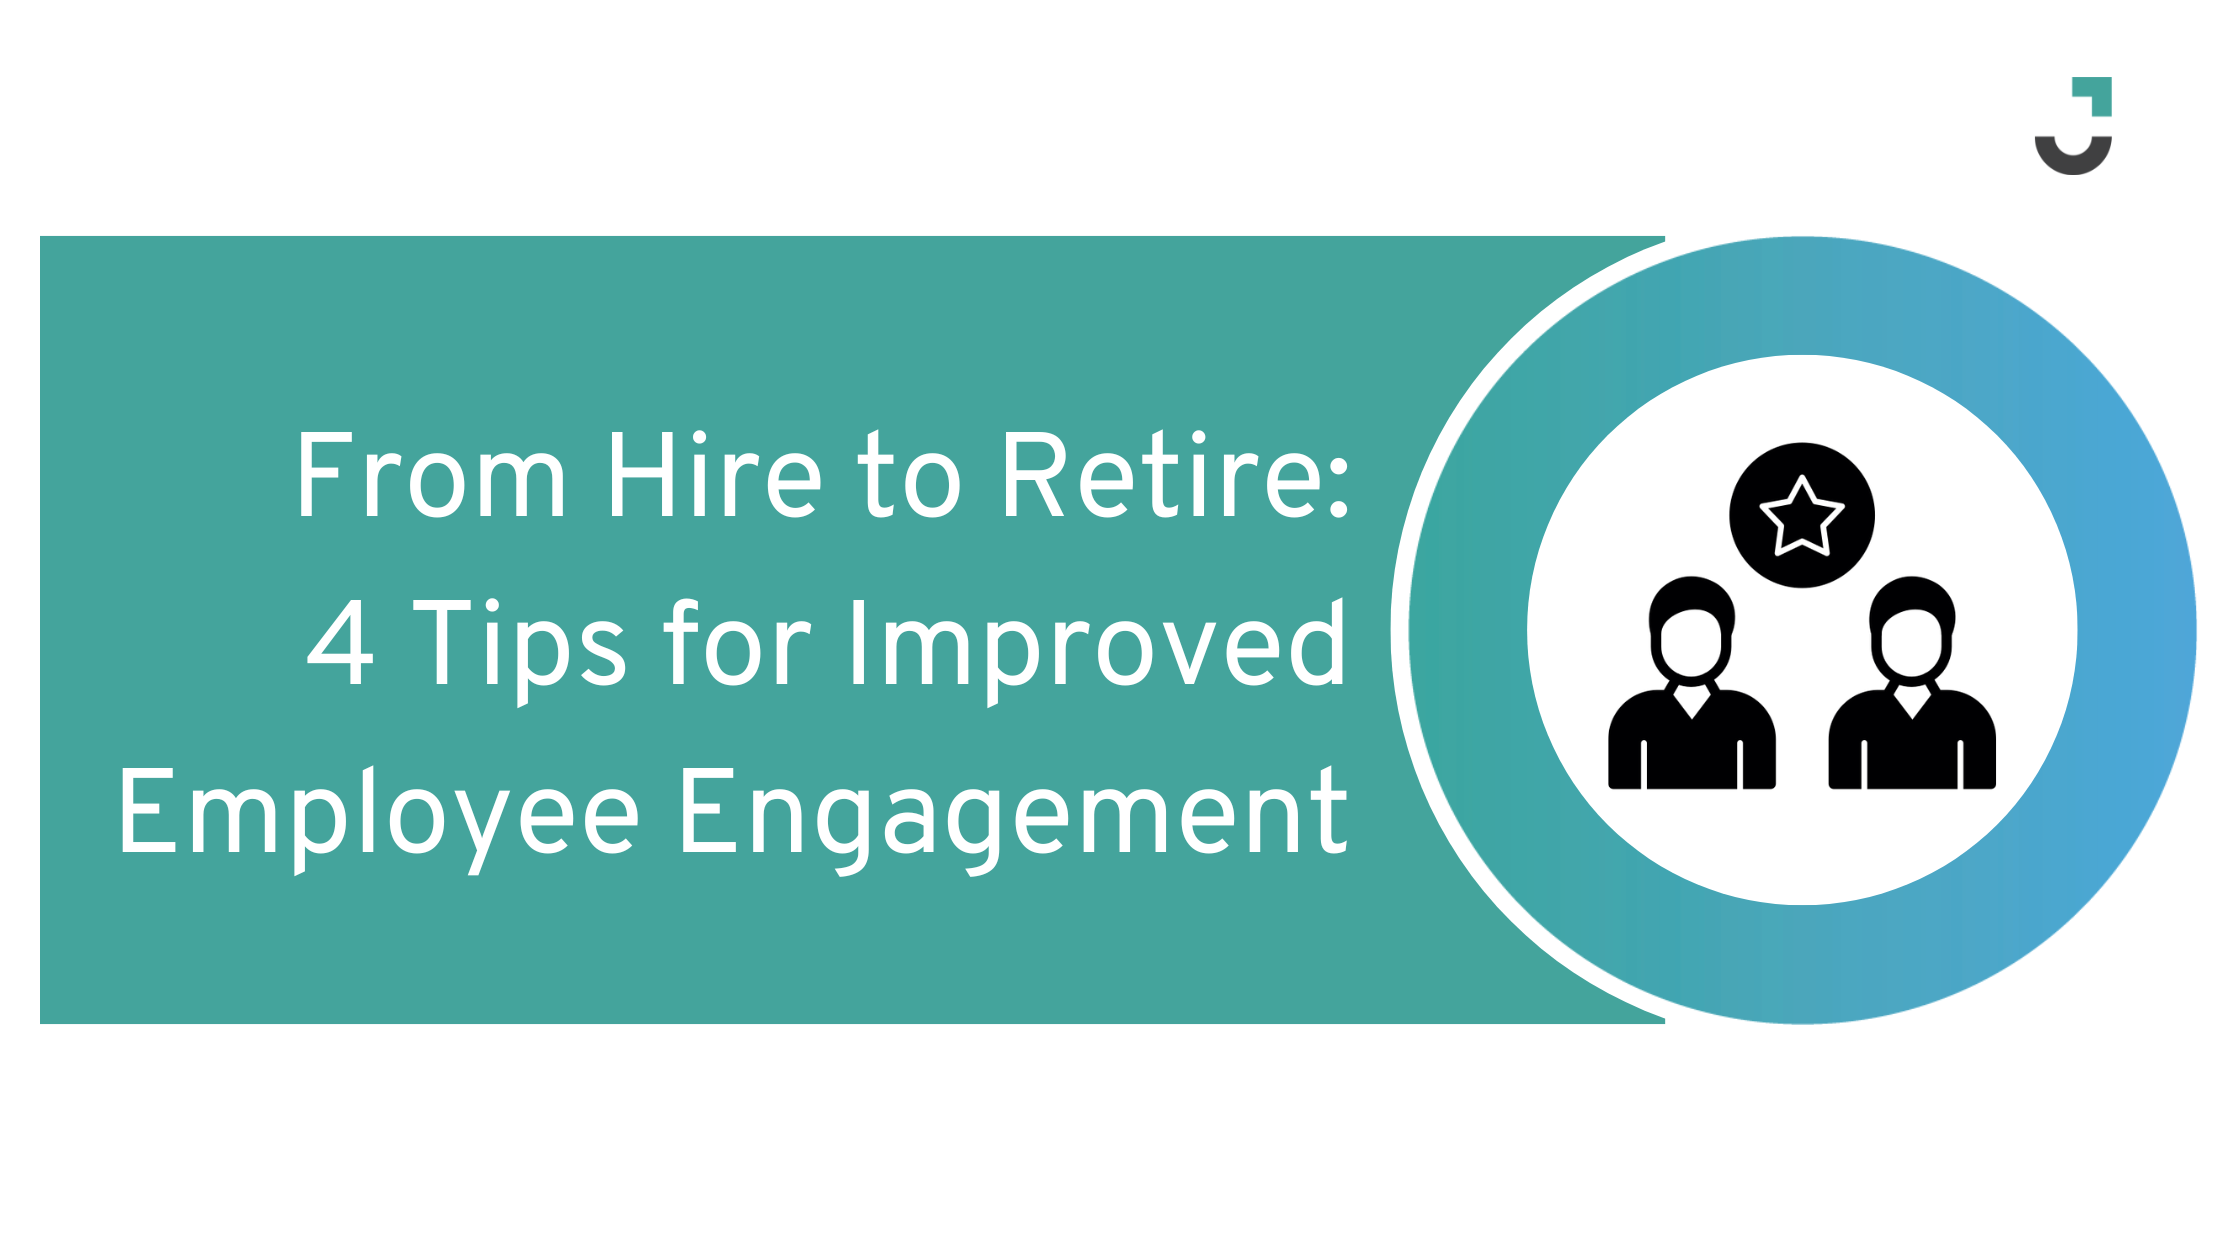 From Hire to Retire: 4 Tips for Improved Employee Engagement